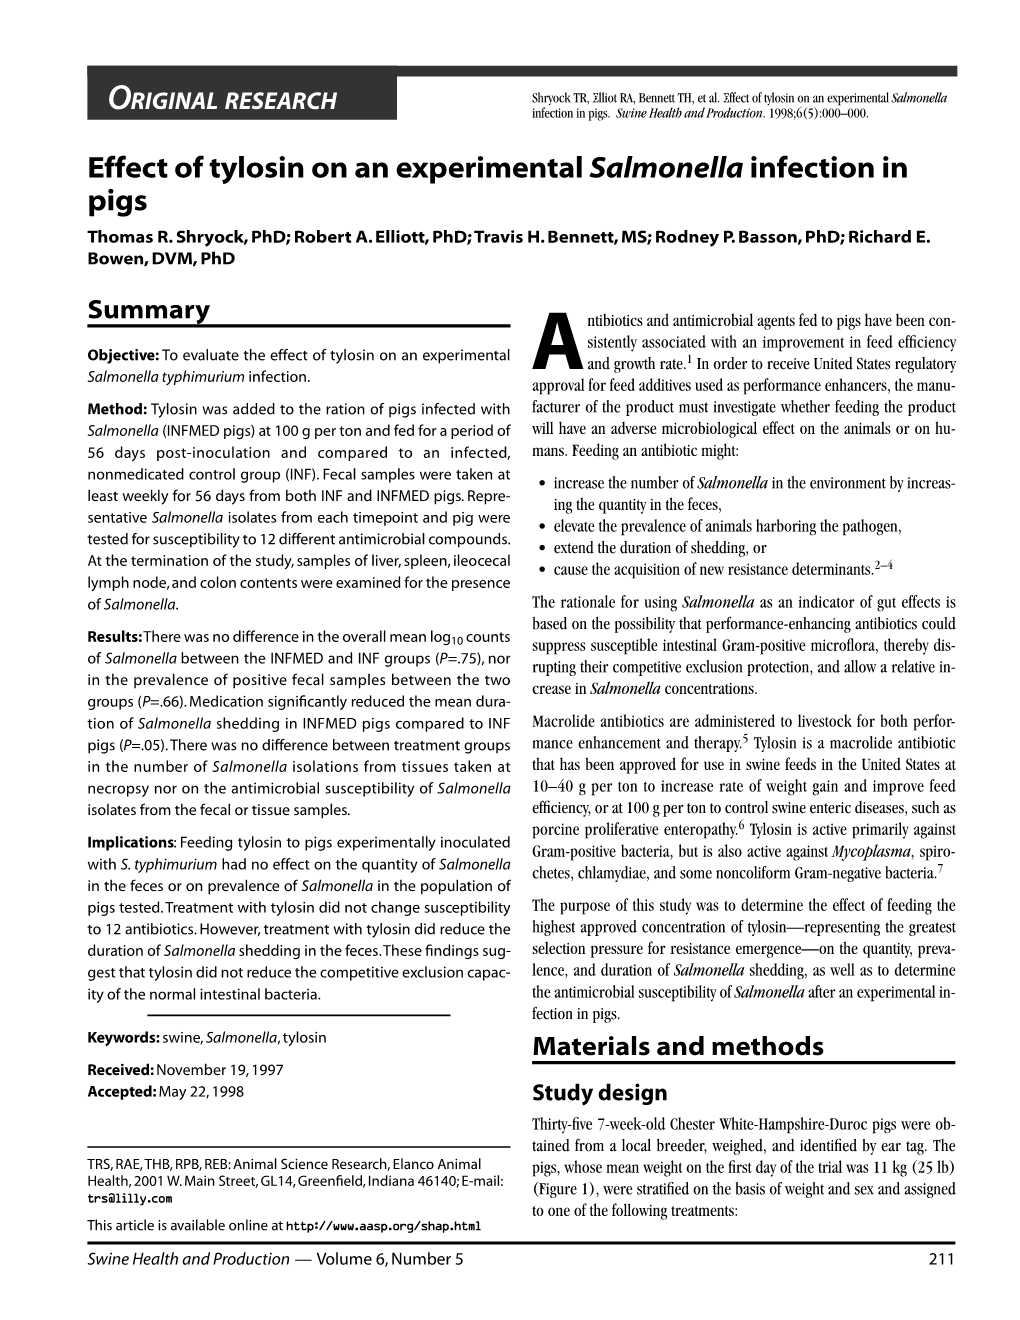 Effect of Tylosin on an Experimental Salmonella Infection in Pigs Thomas R